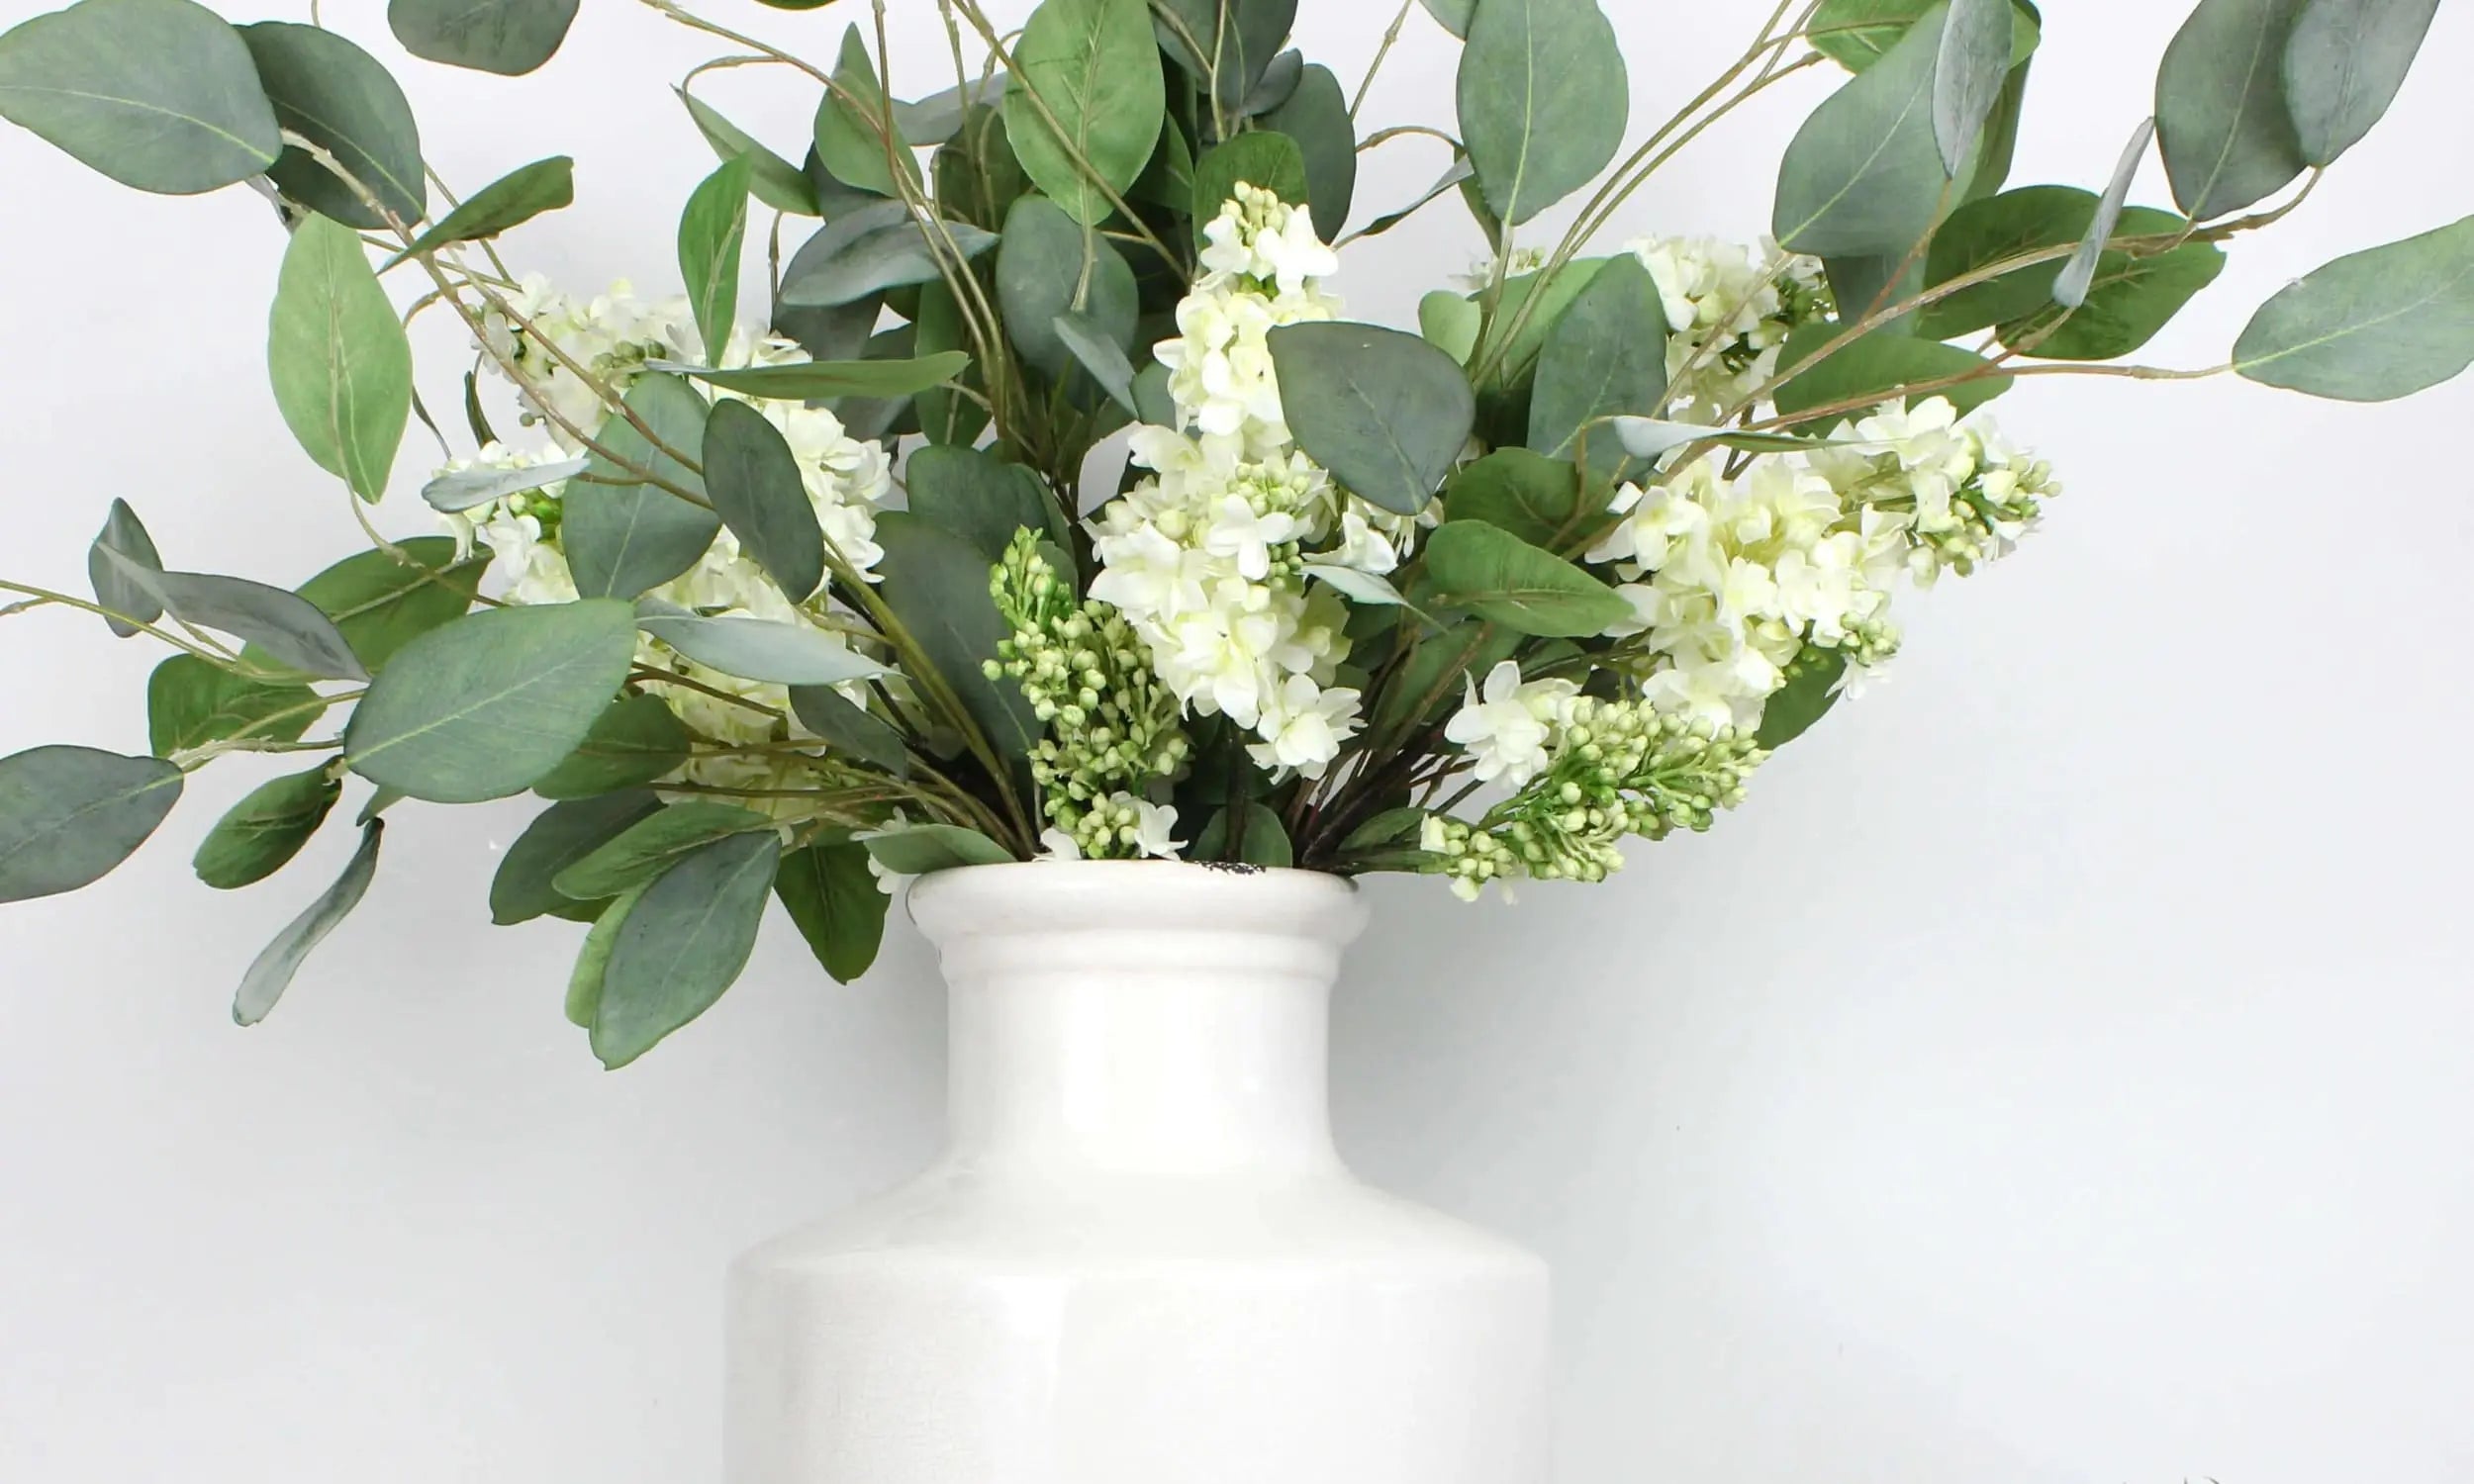 Timeless Vases: The Ultimate Home Accessory